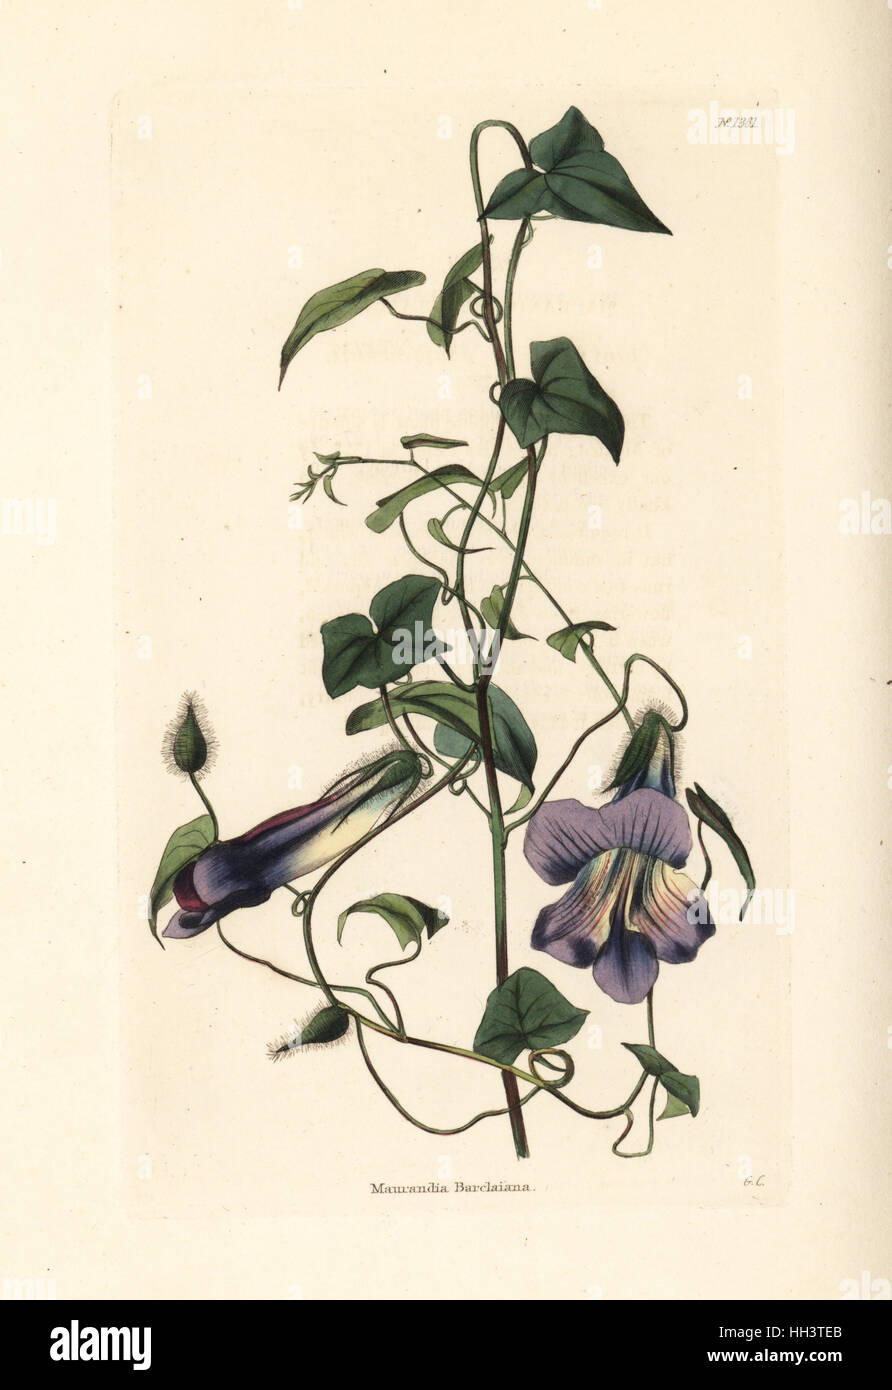 Angel's trumpet or Mexican viper, Maurandya barclayana. Handcoloured copperplate engraving by George Cooke from Conrad Loddiges' Botanical Cabinet, Hackney, 1828. Stock Photo